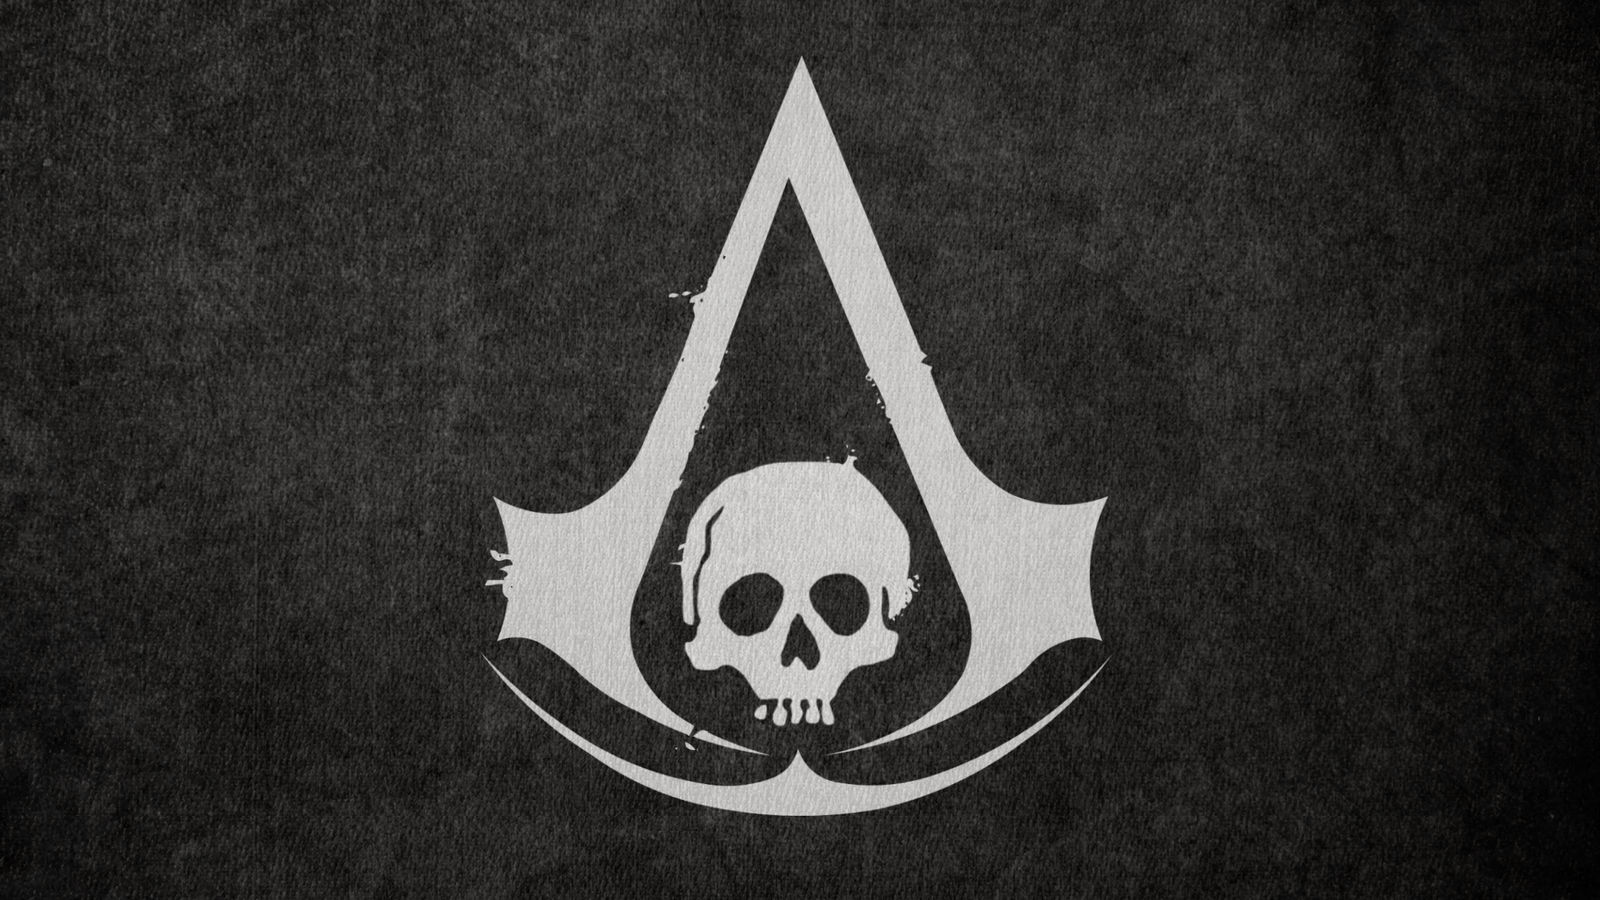 Assassin's Creed Wallpaper by AderitoAgerico on DeviantArt